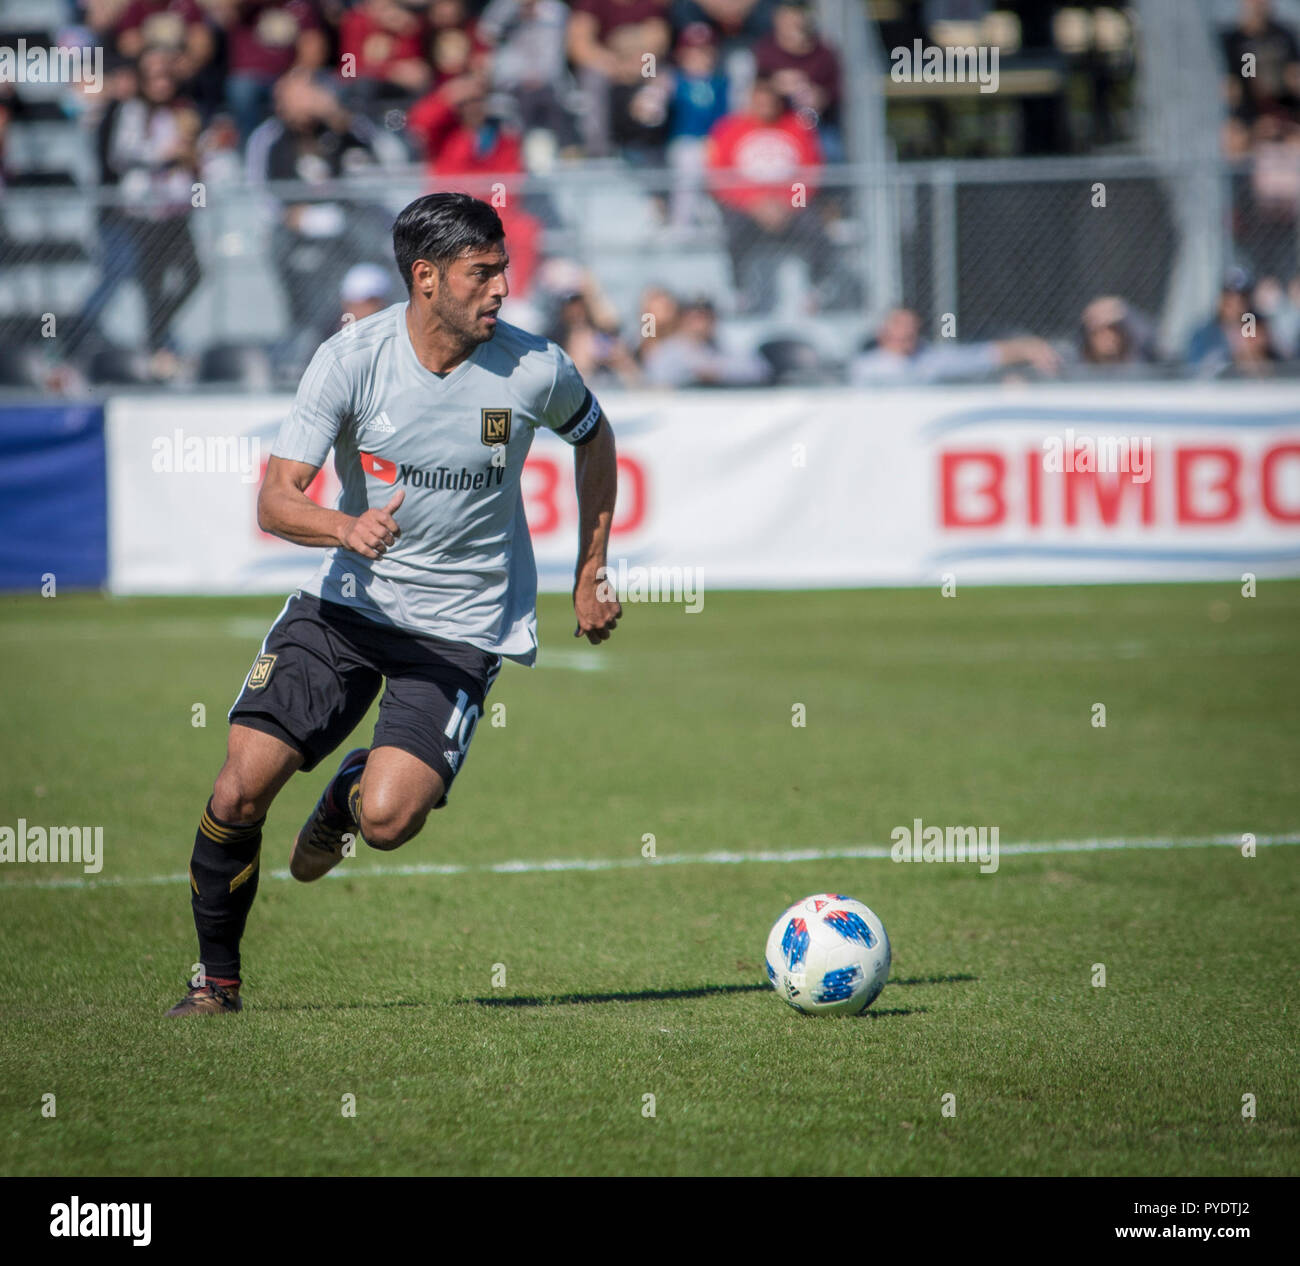 Carlos Vela with the dribble move Stock Photo